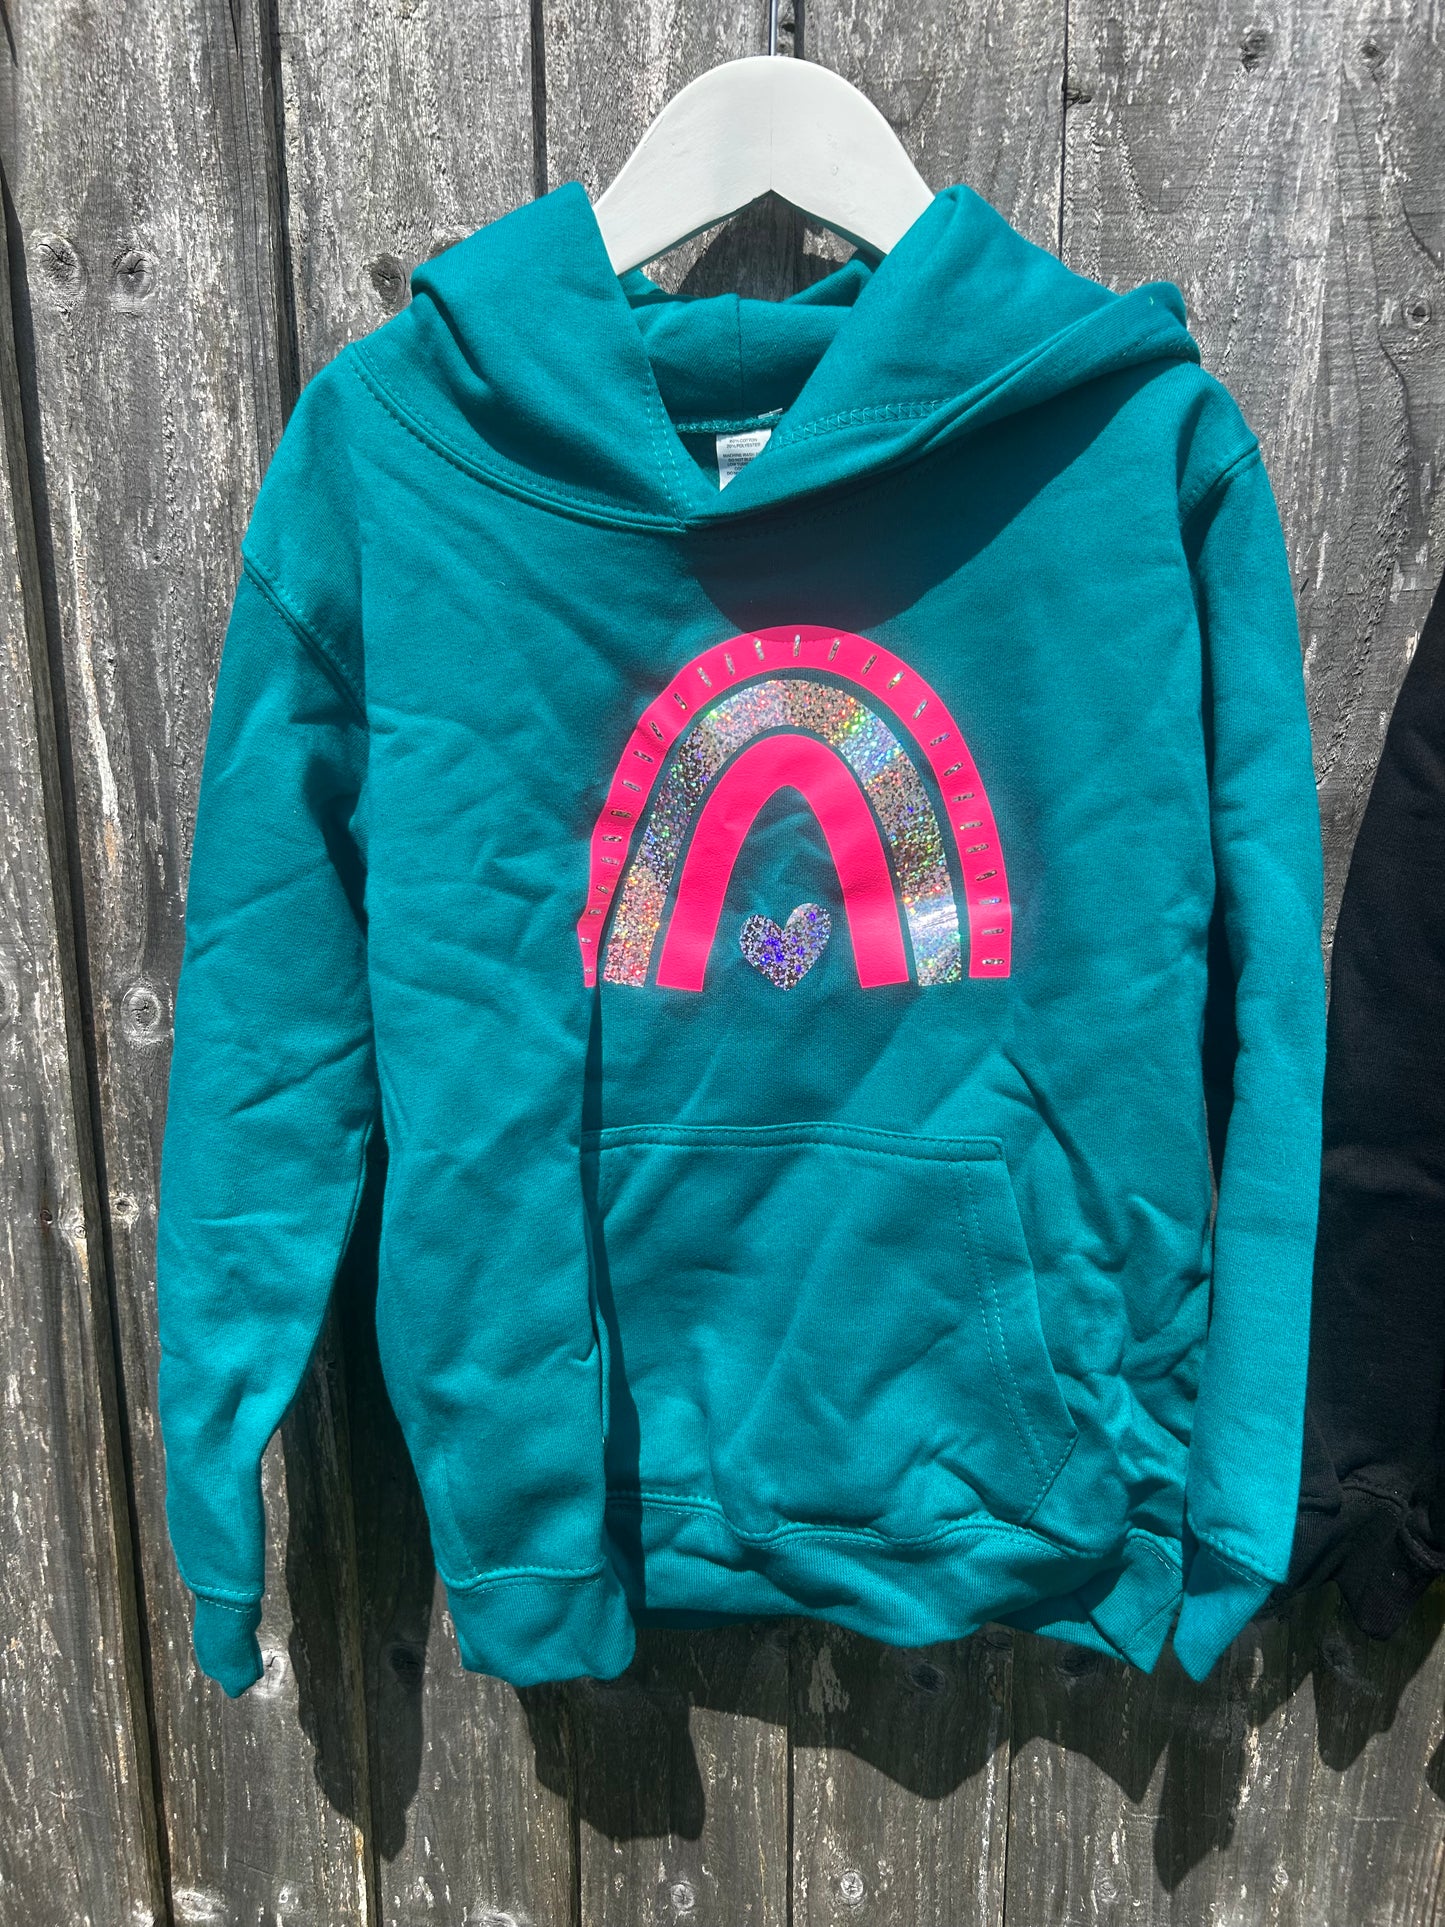 Clothing Clearance - Childrens Hoodies & T Shirts - Limited Stock!